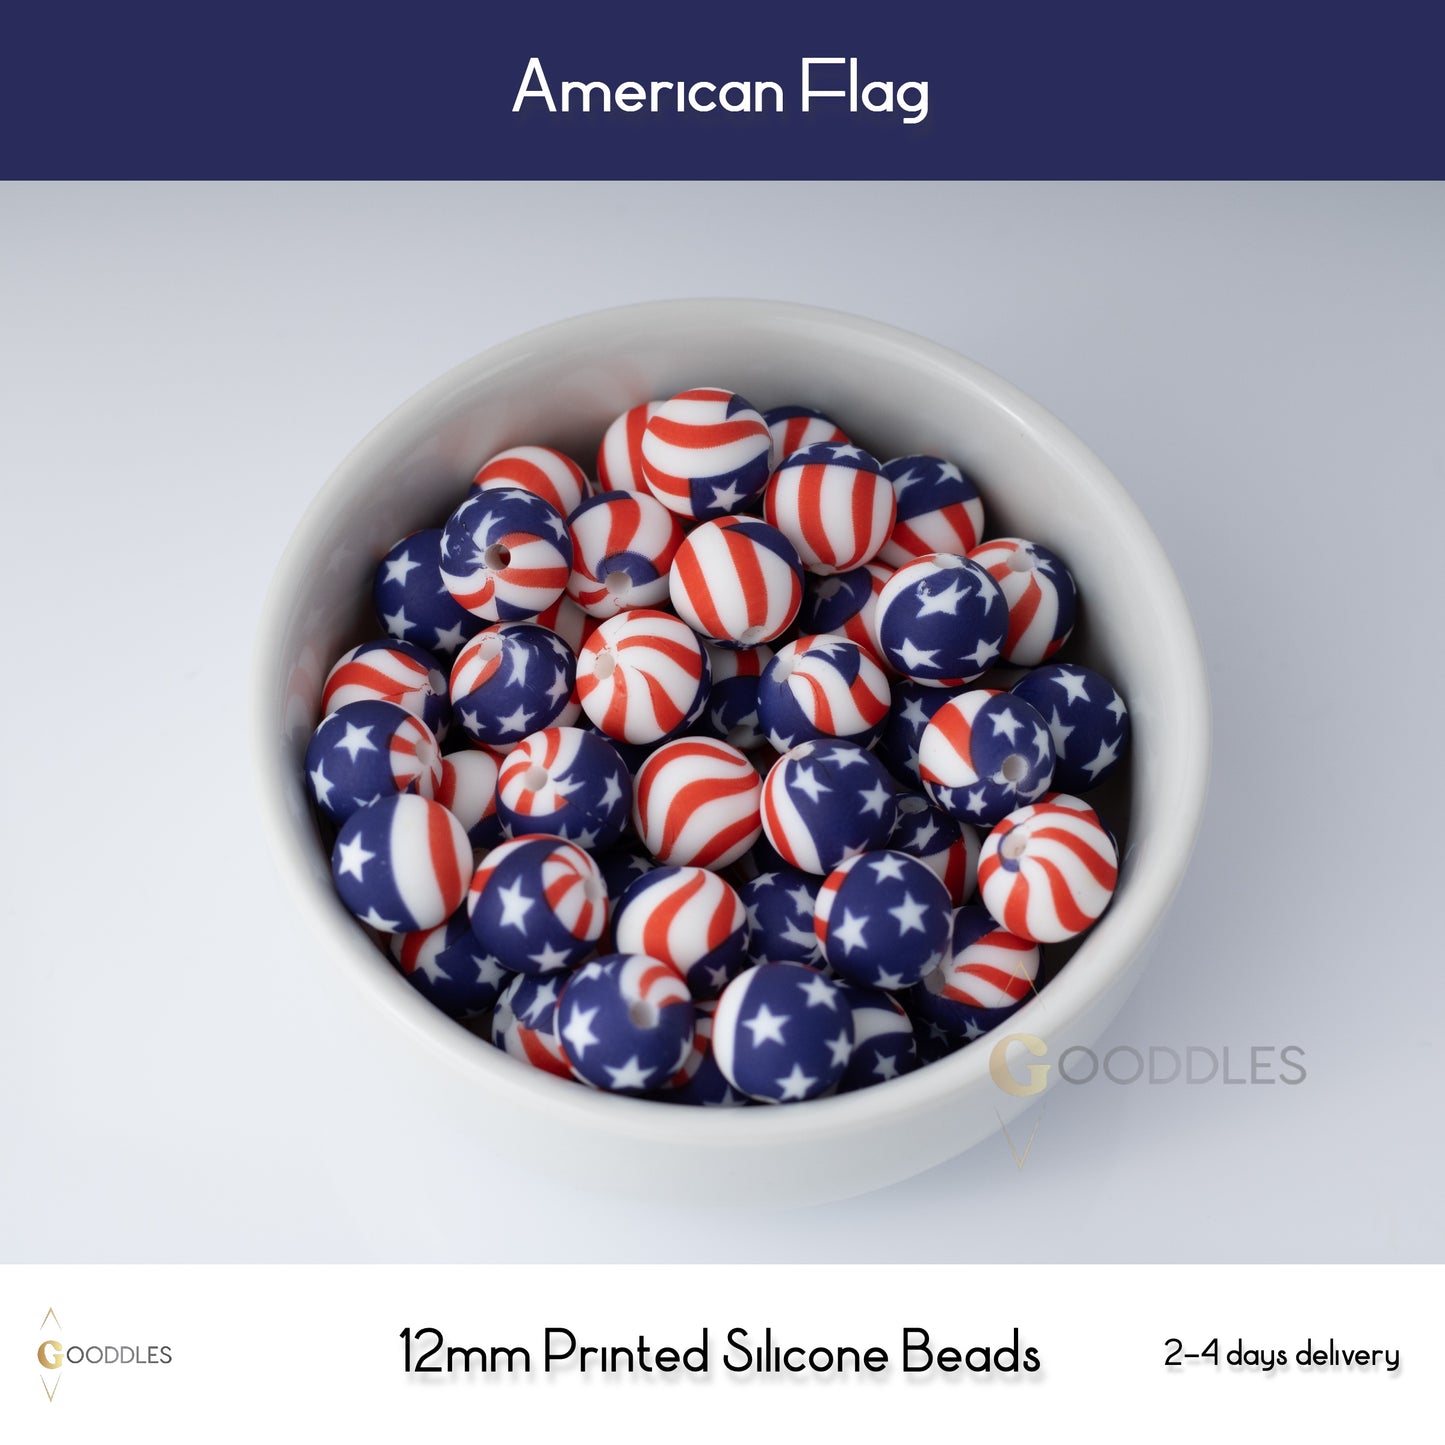 5pcs, American Flag Silicone Beads Printed Round Silicone Beads